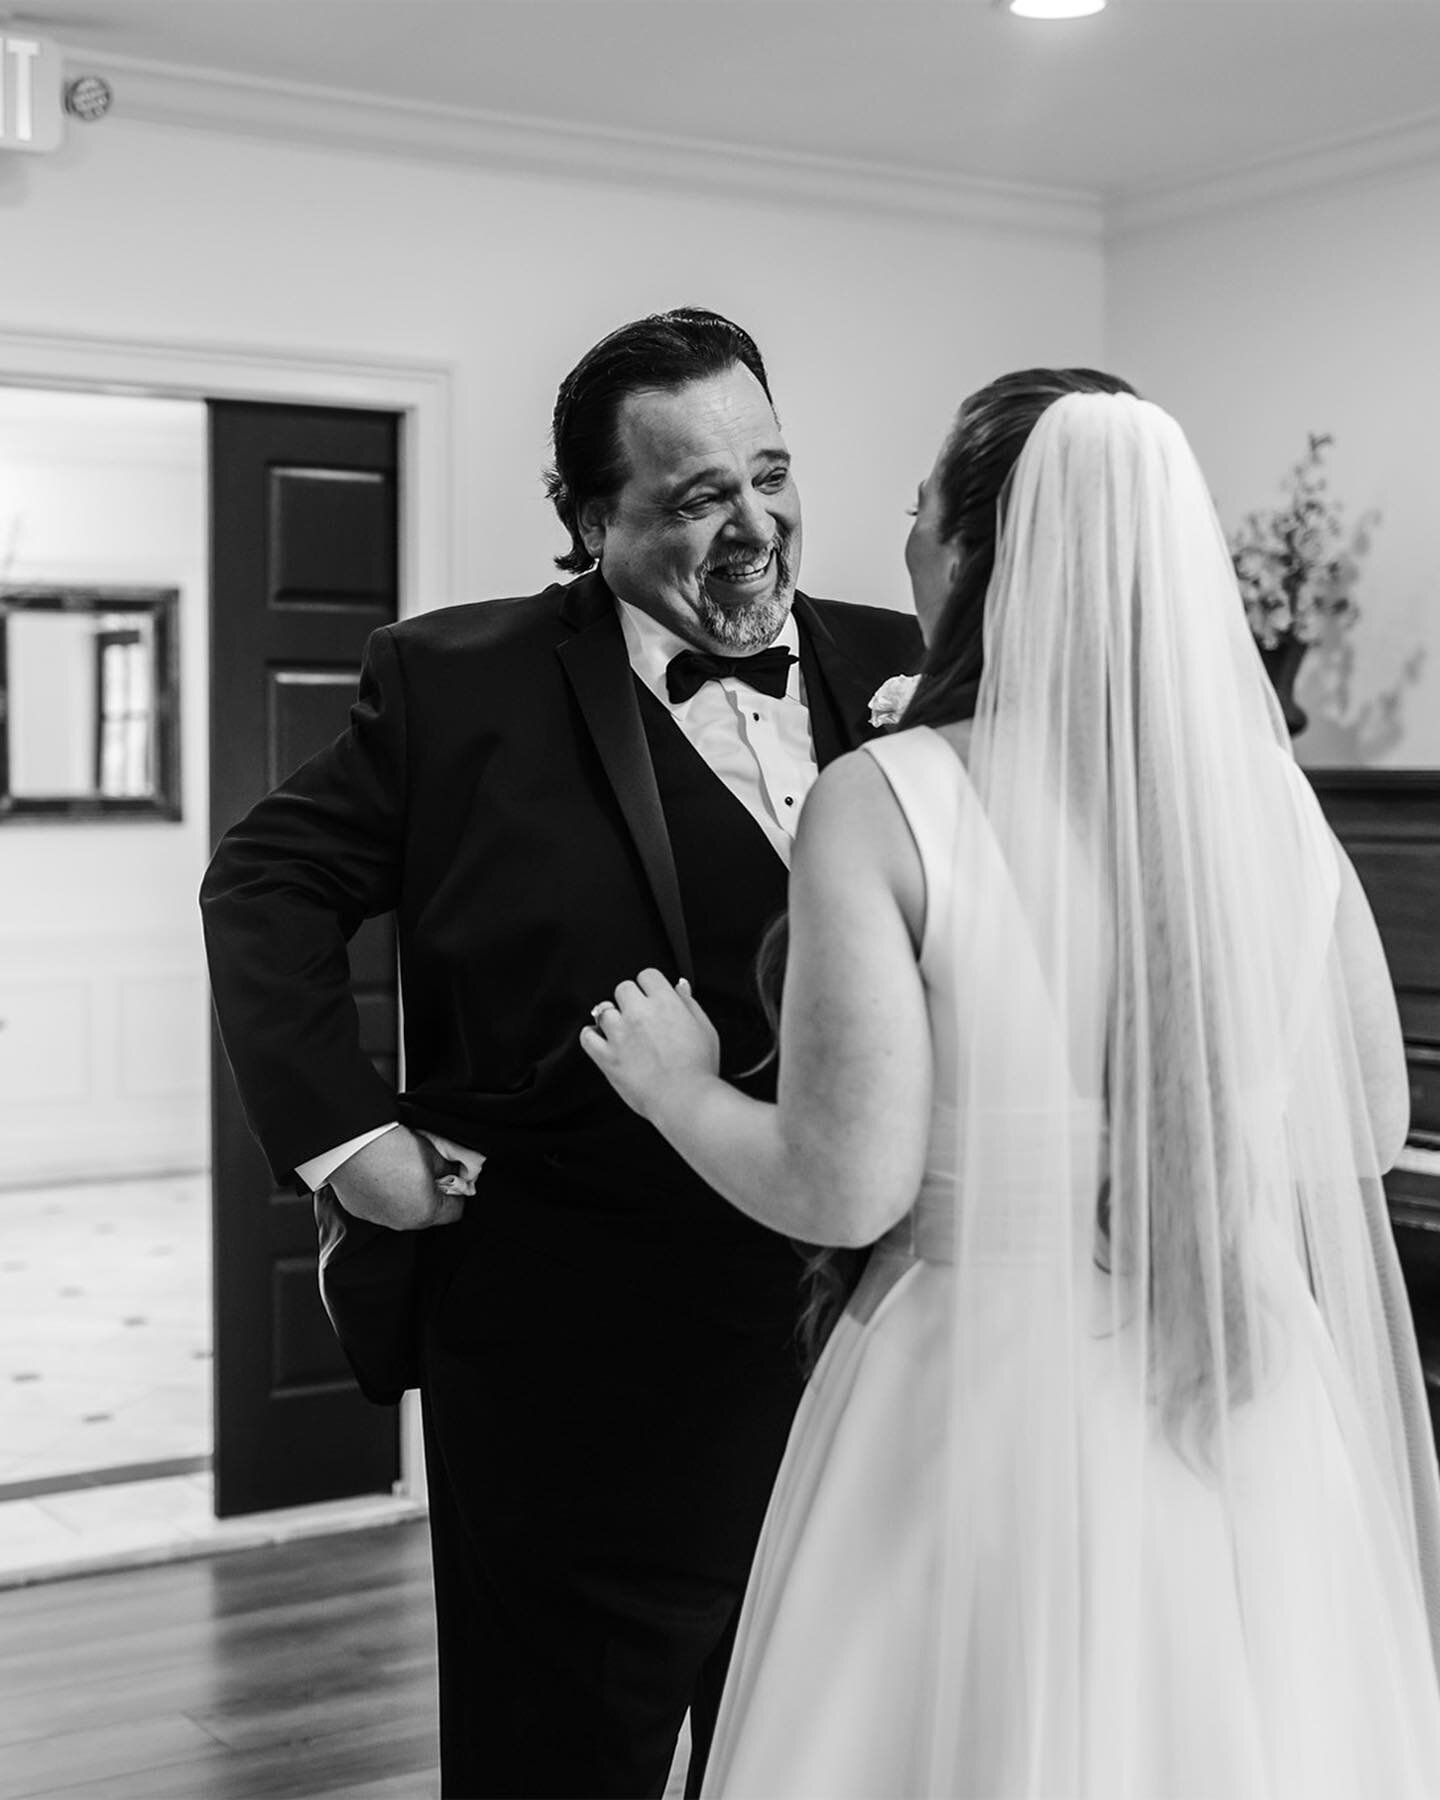 This first look with dad had allllll the emotions. What an incredible moment for Alissa and her dad before her wedding. 

#firstlookwithdad #newjerseybridemag #njbrides #newjerseybrides #gettingmarriedsoon #firstlookinspiration #njweddingphotography 